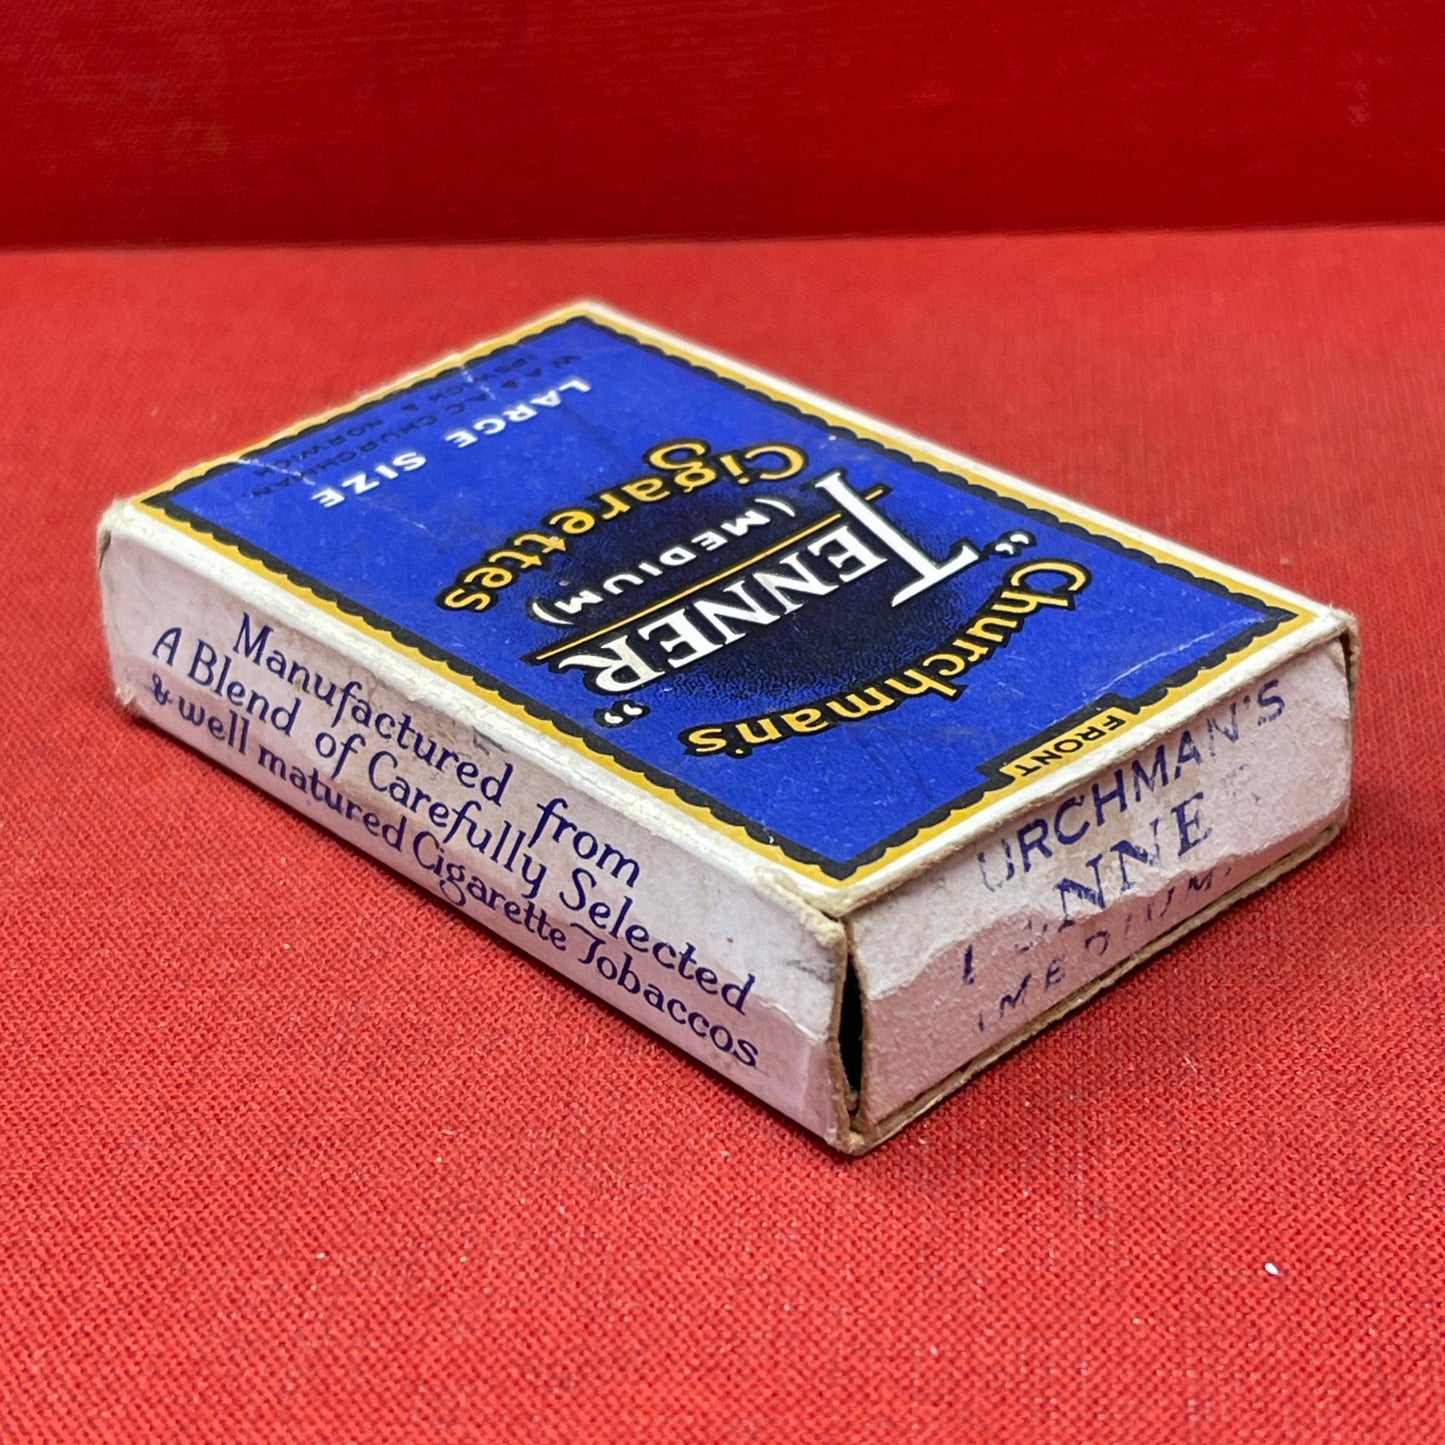 Cardboard cigarette packet consisting of a blue and black-printed sleeve and a cardboard drawer